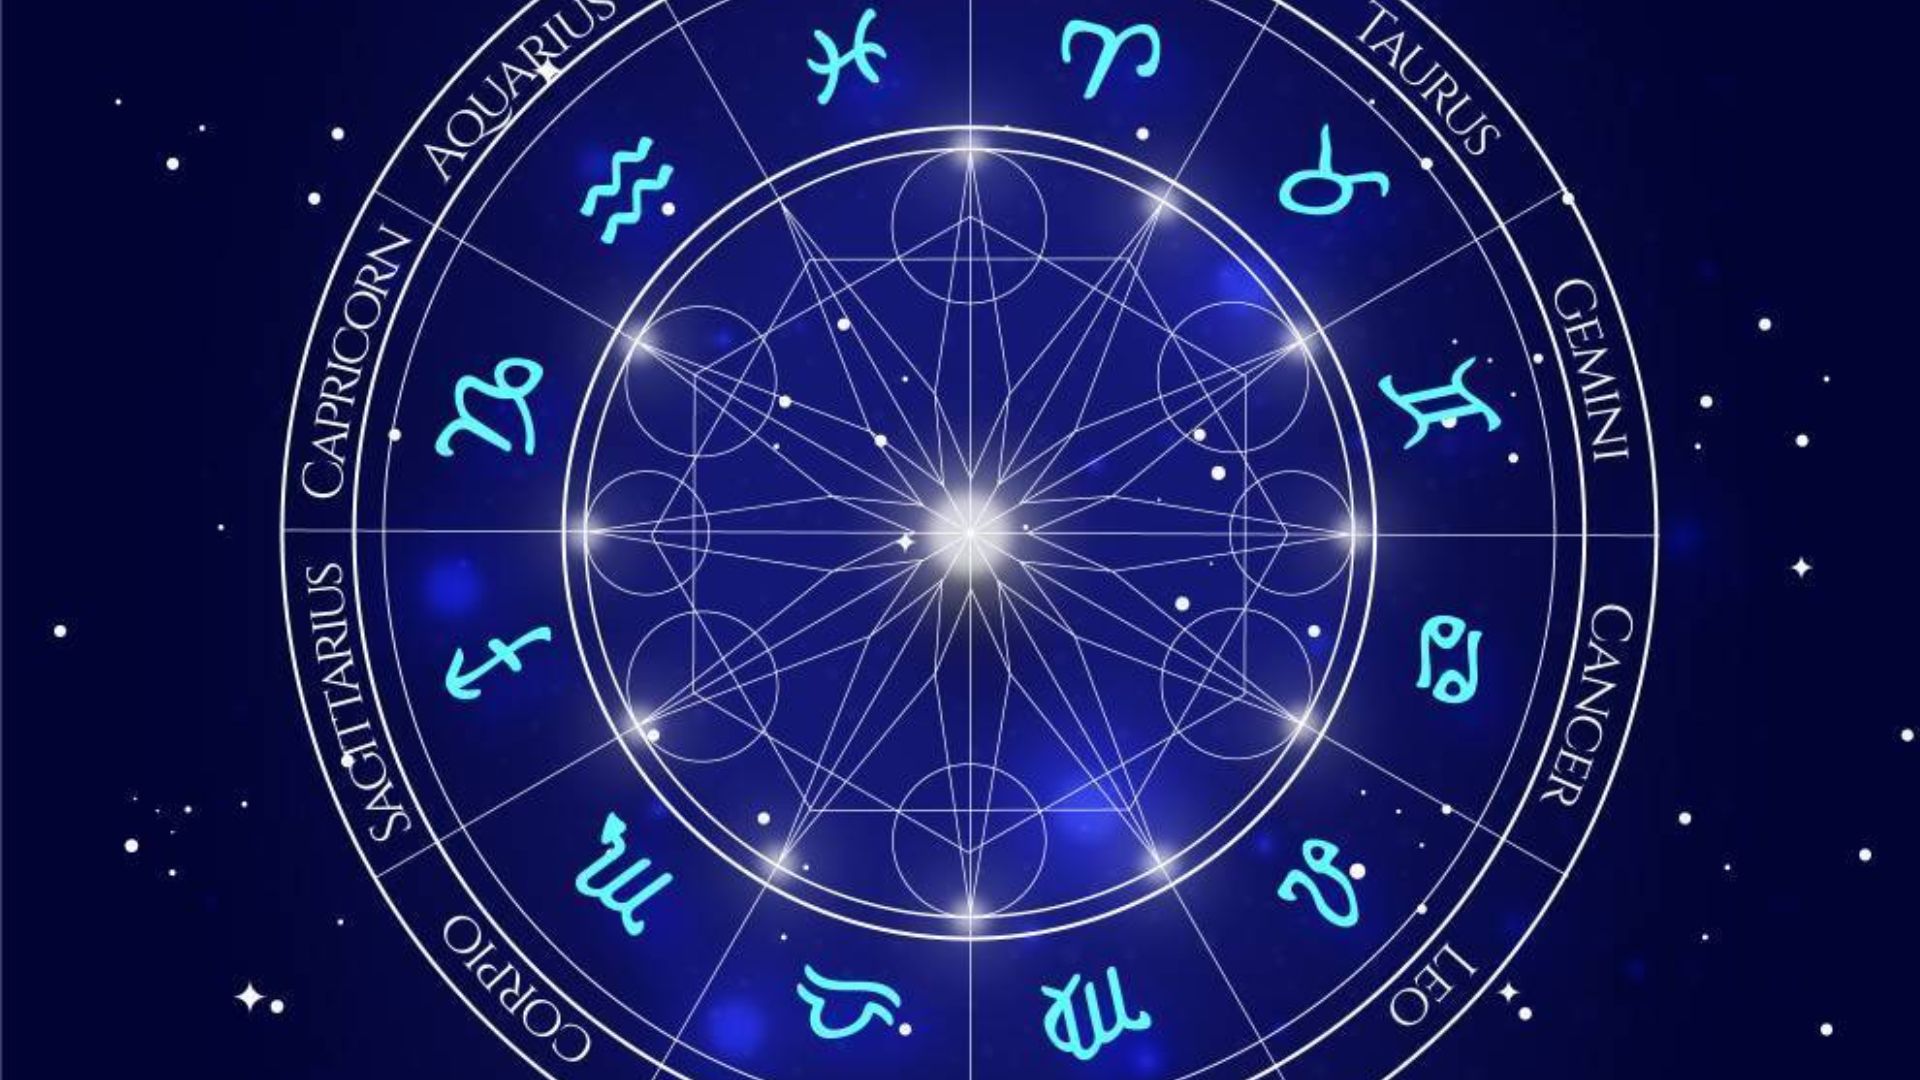 All Zodiac Signs In Round Circle